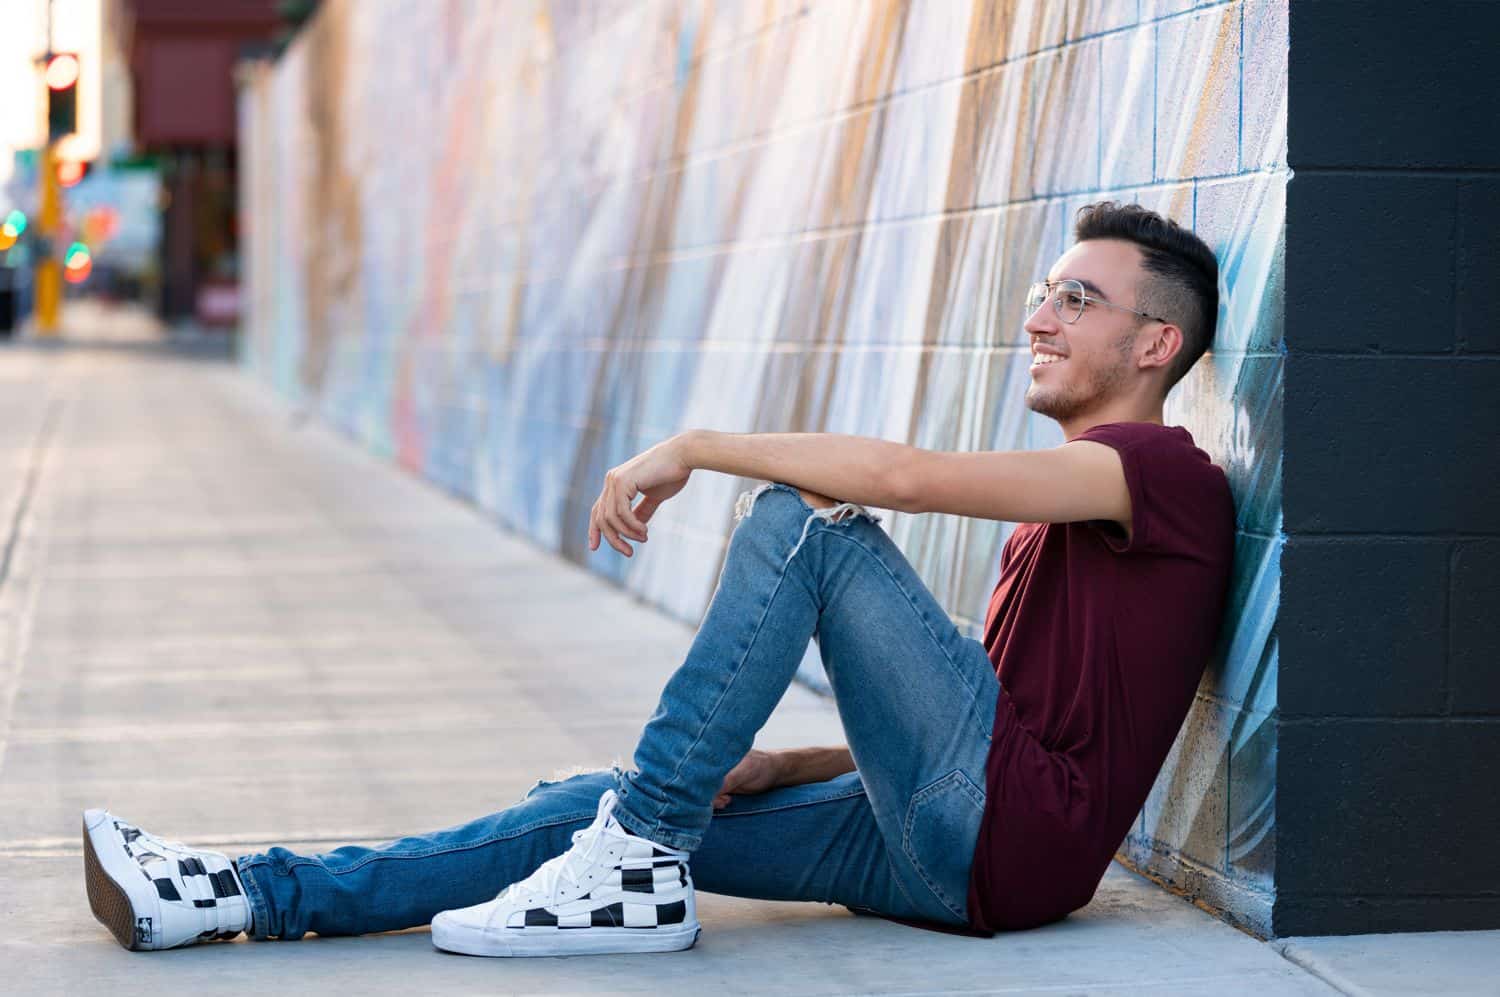 20 Pose For Boys That Take Your Photos To Another Level  StarBizcom